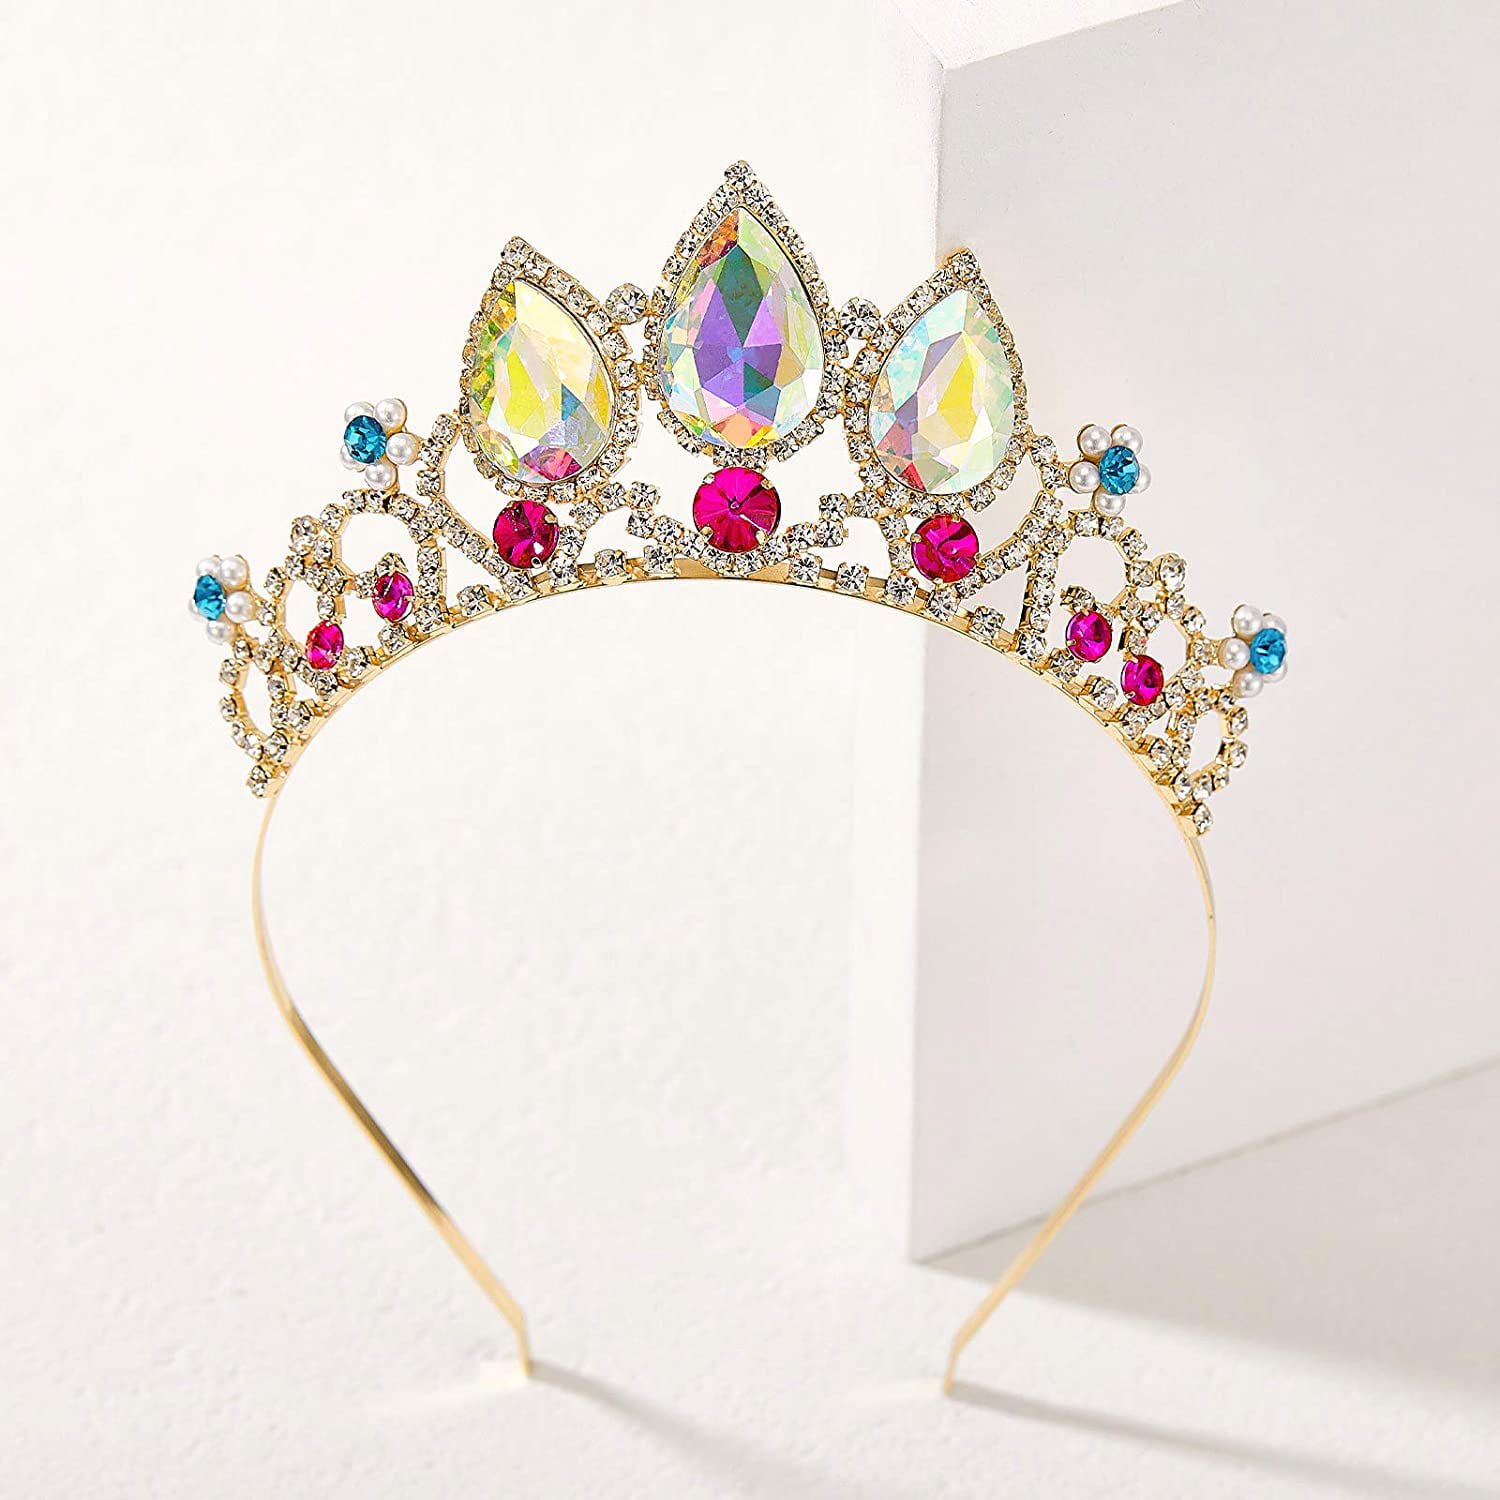 Stunning Hair Tiara Girl Crown Clear Crystal Wedding Prom Costumes Party Jewelry 